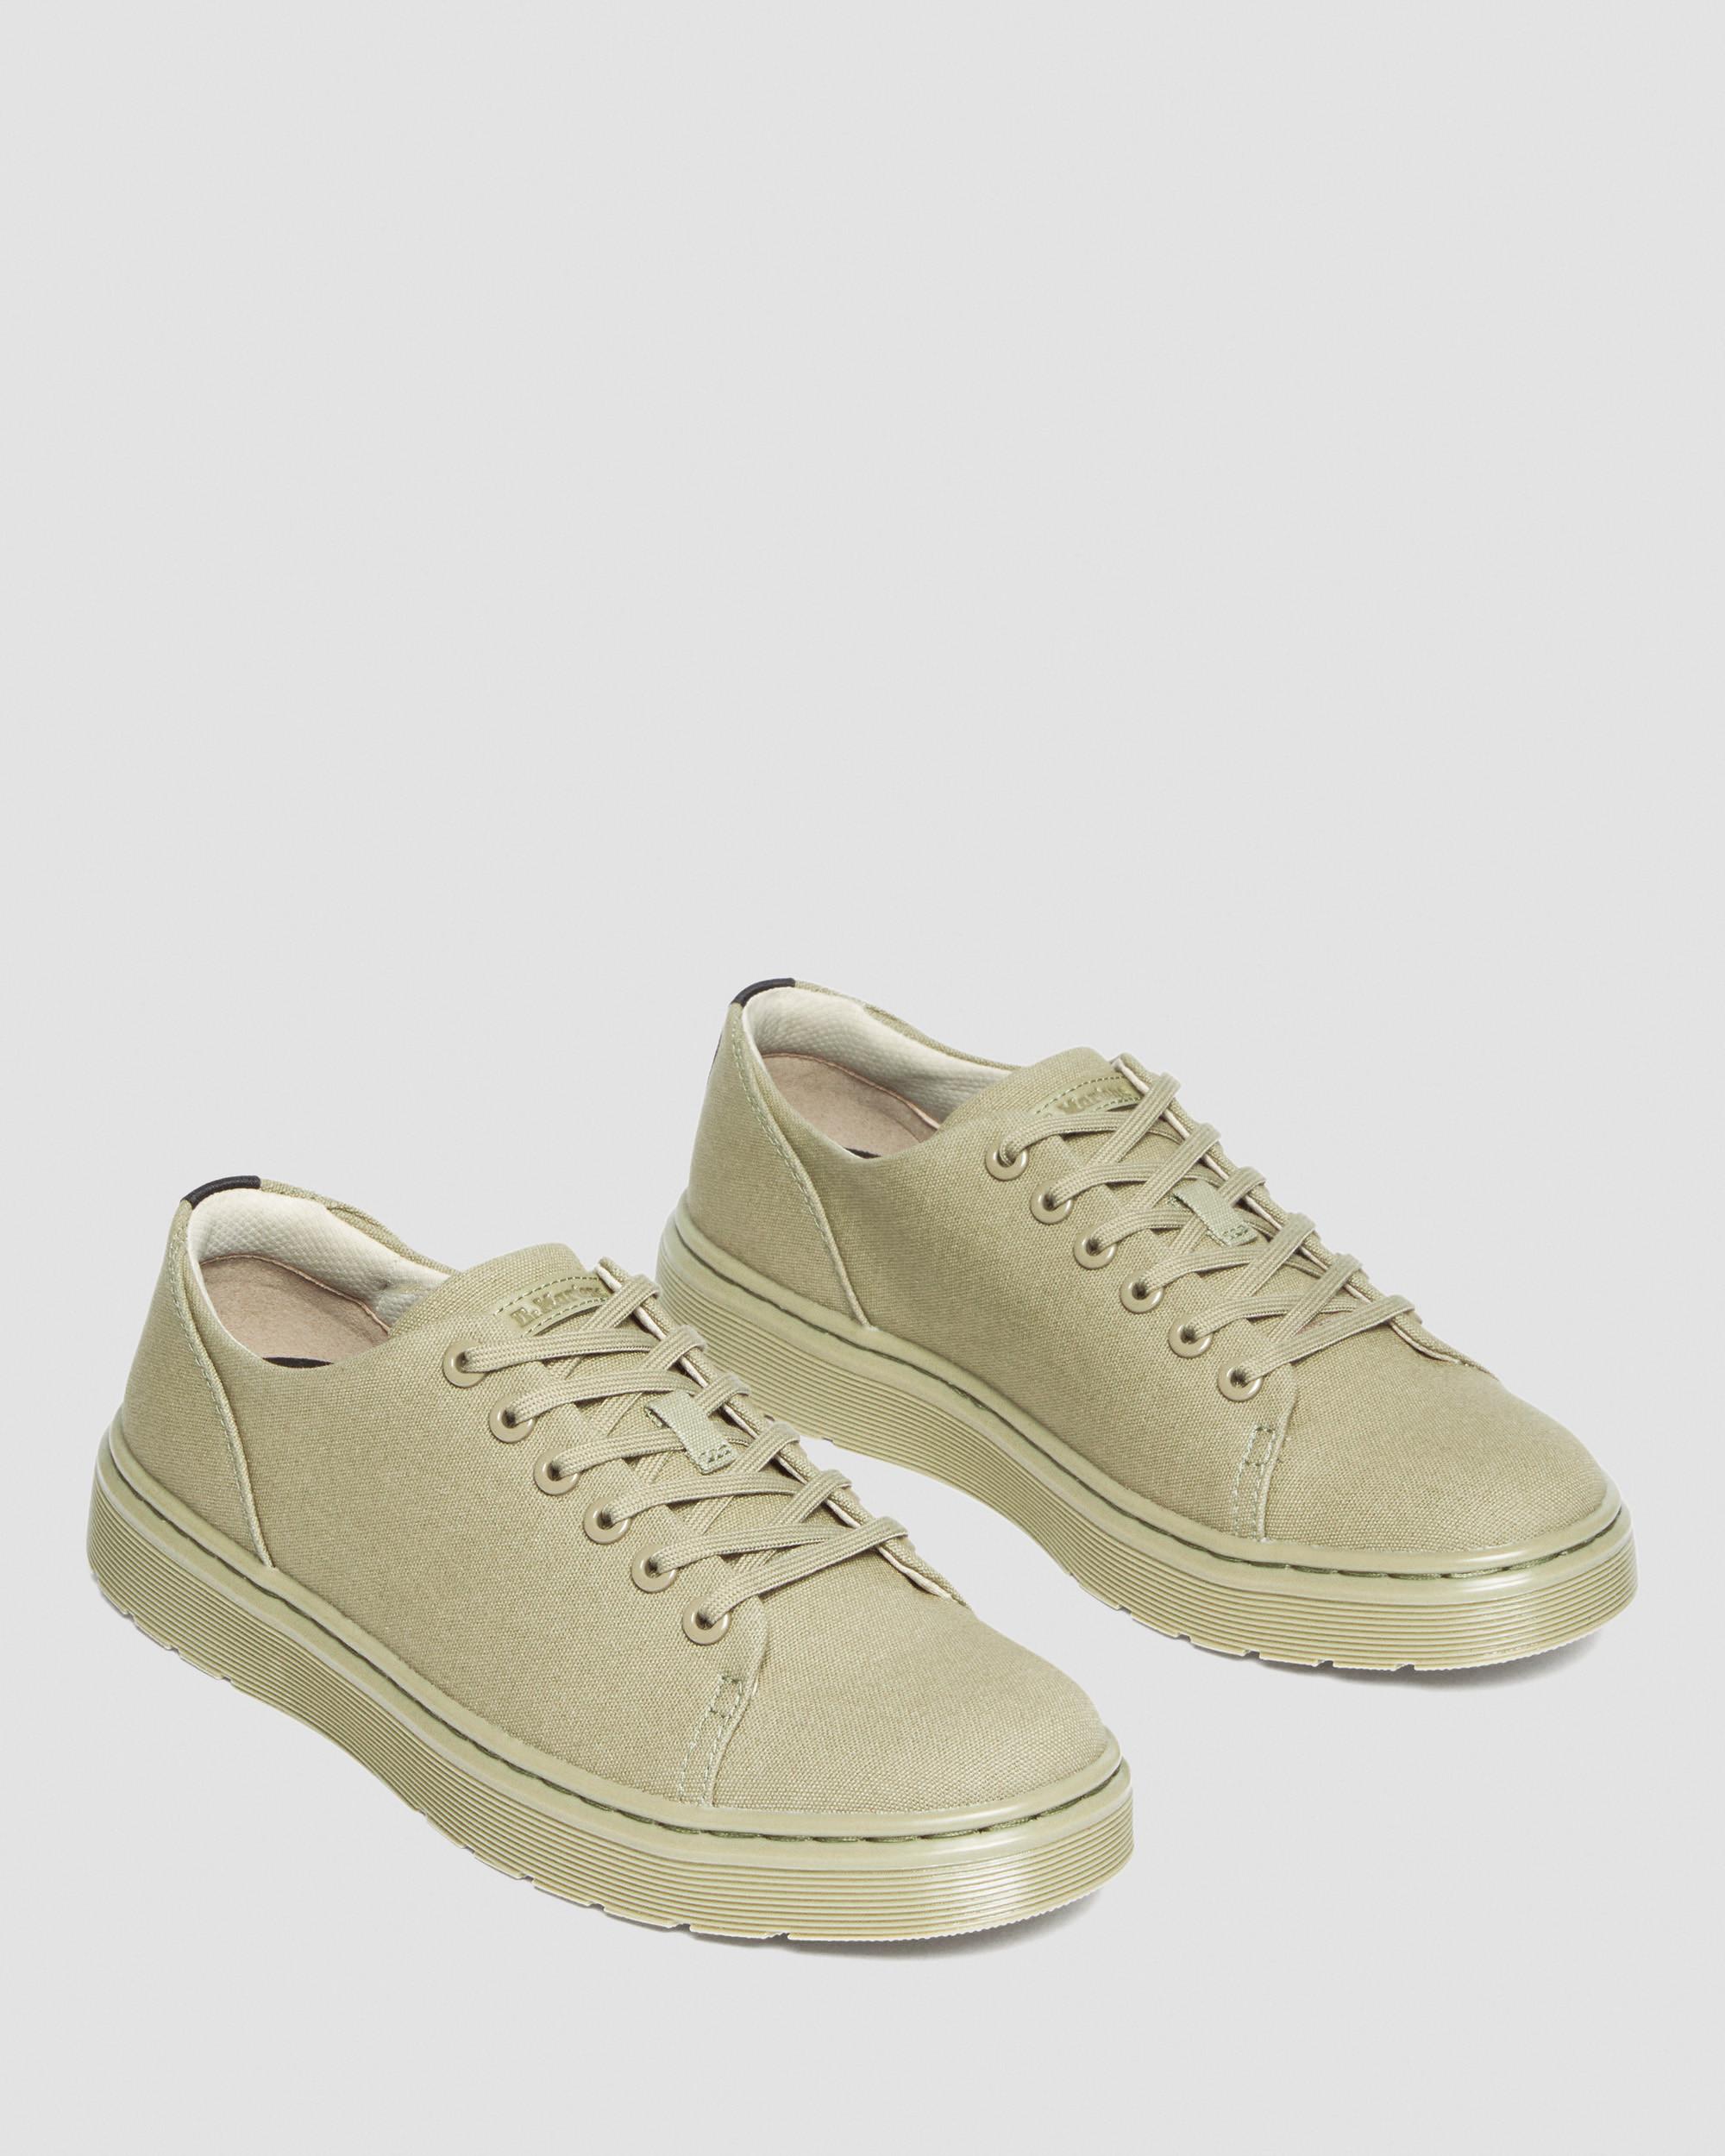 Dante Canvas Casual Shoes in Pale Olive | Dr. Martens